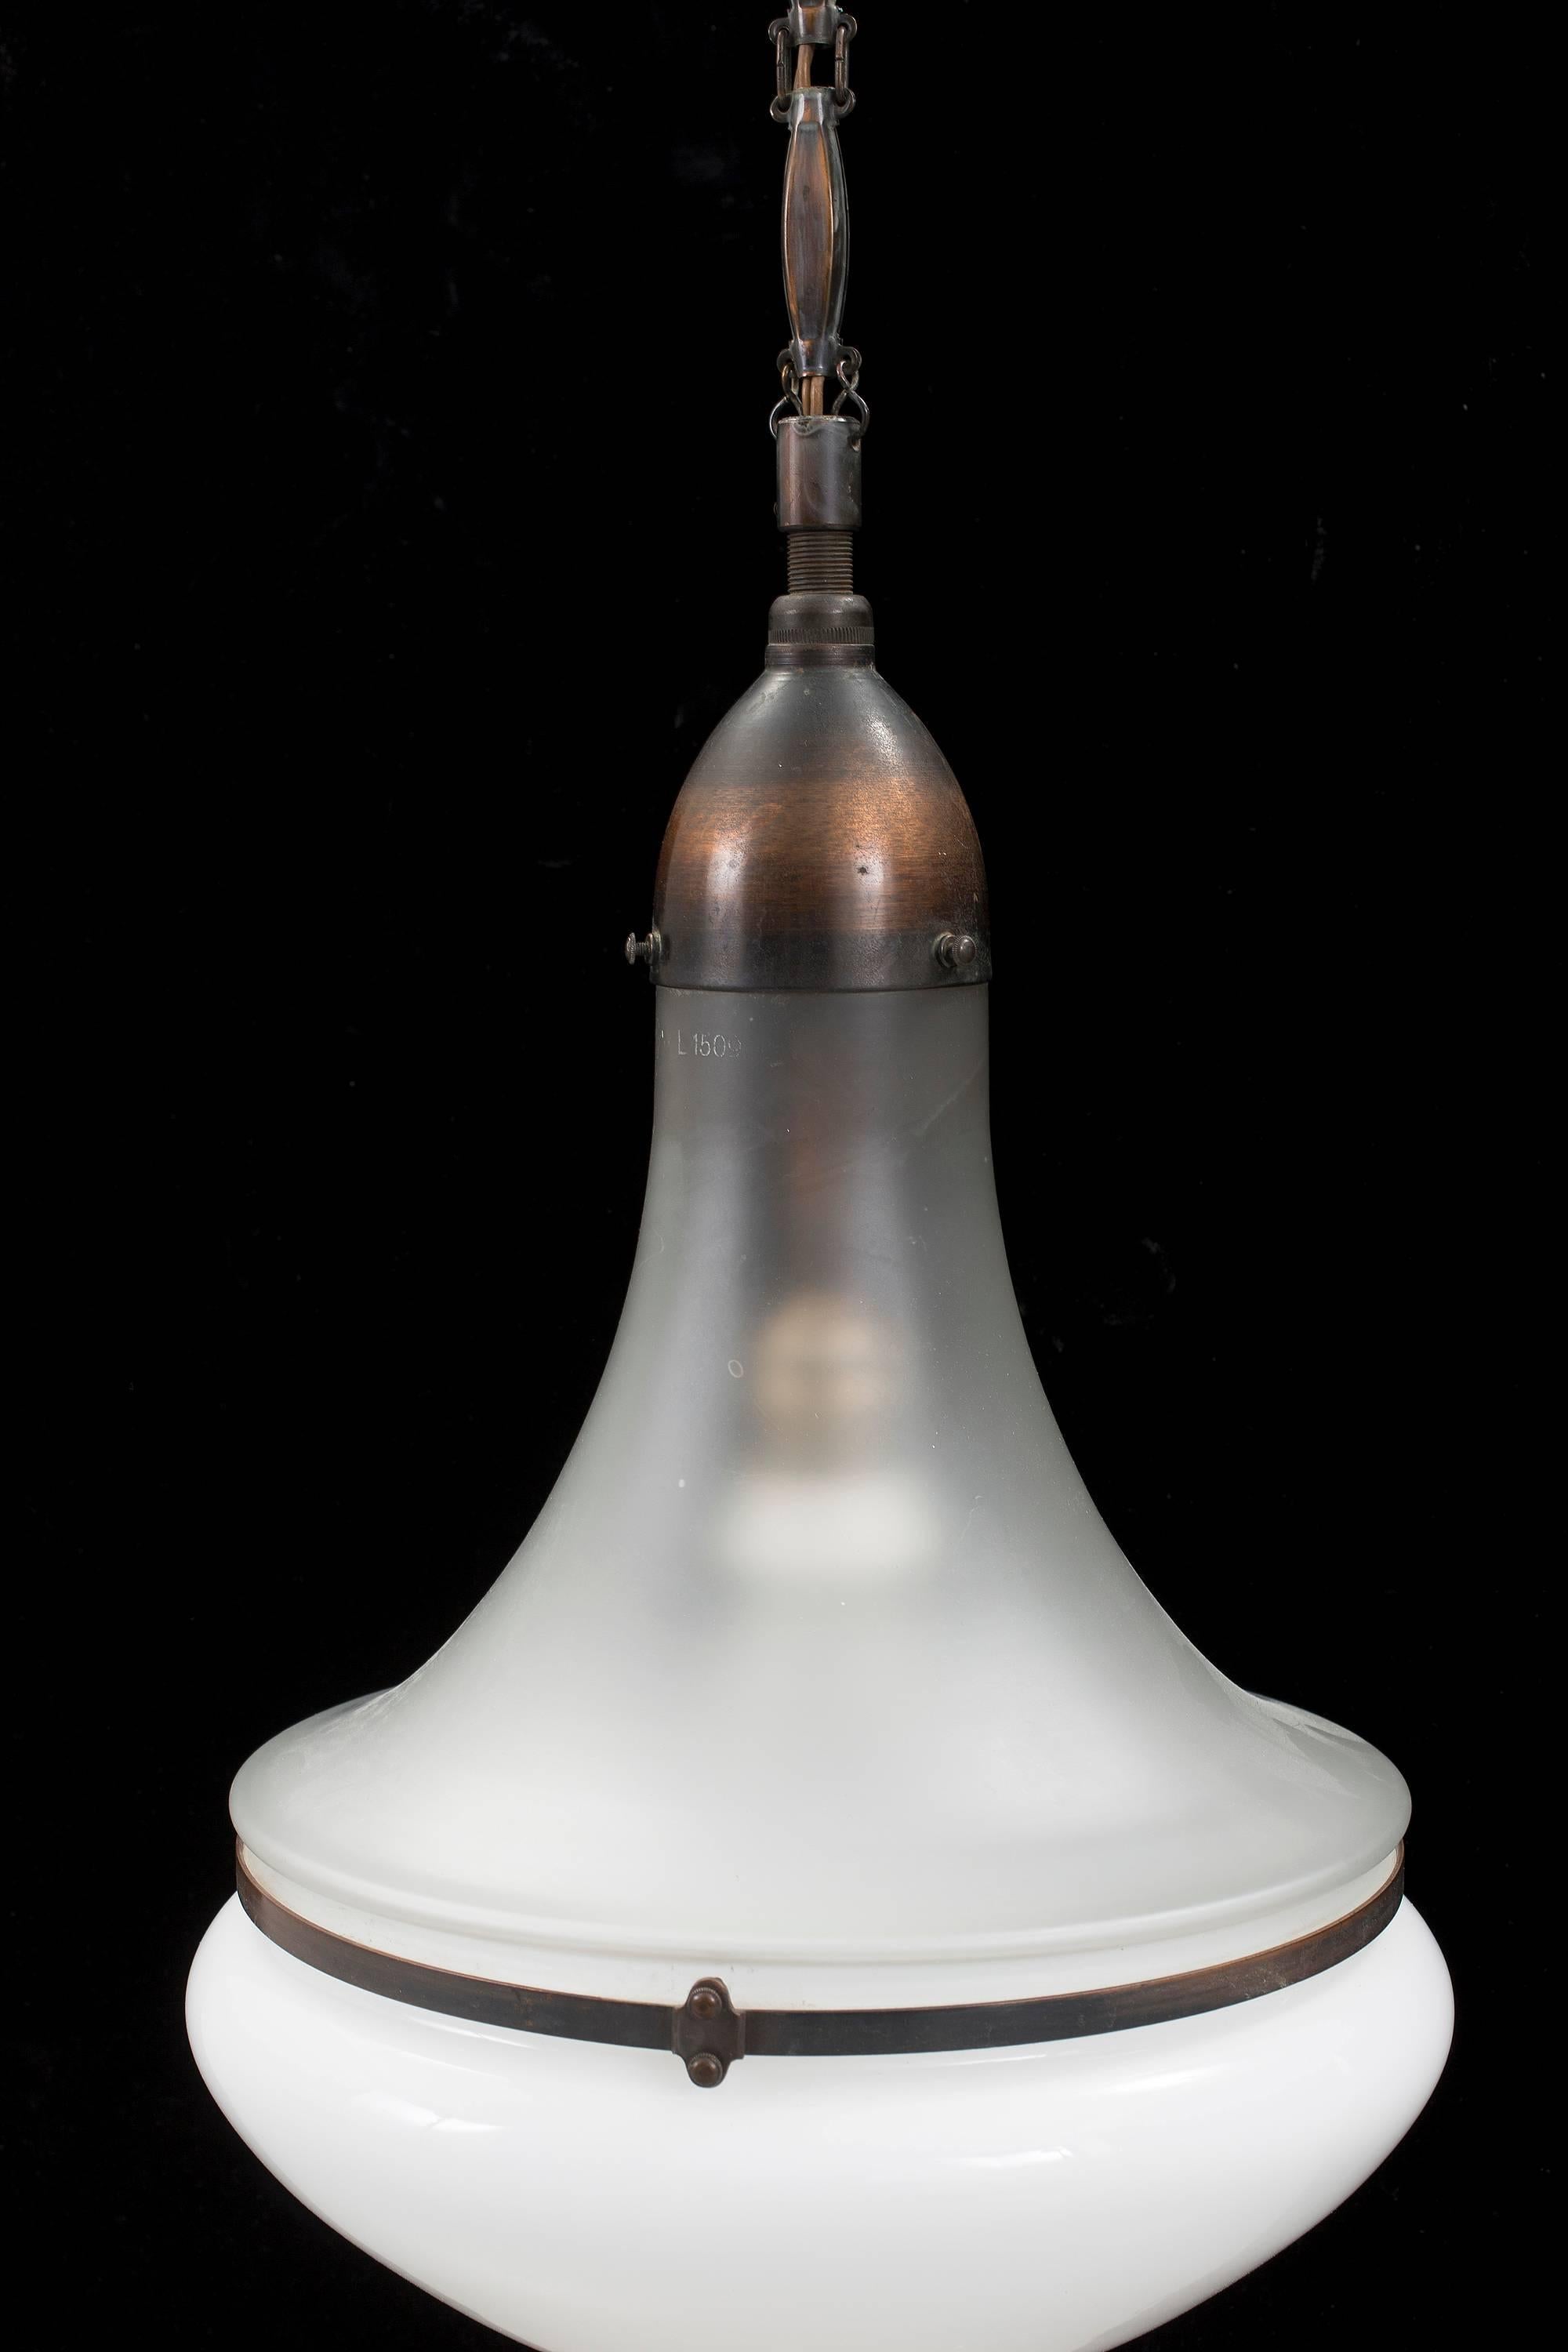 The pendant was designed by Peter Behrens in 1908 for Siemens.
This lamp is complete original with a nice combination of an opaline glass lower shade and a frosted clear glass upper shade.
All metal/copper parts are complete and original.
Perfect